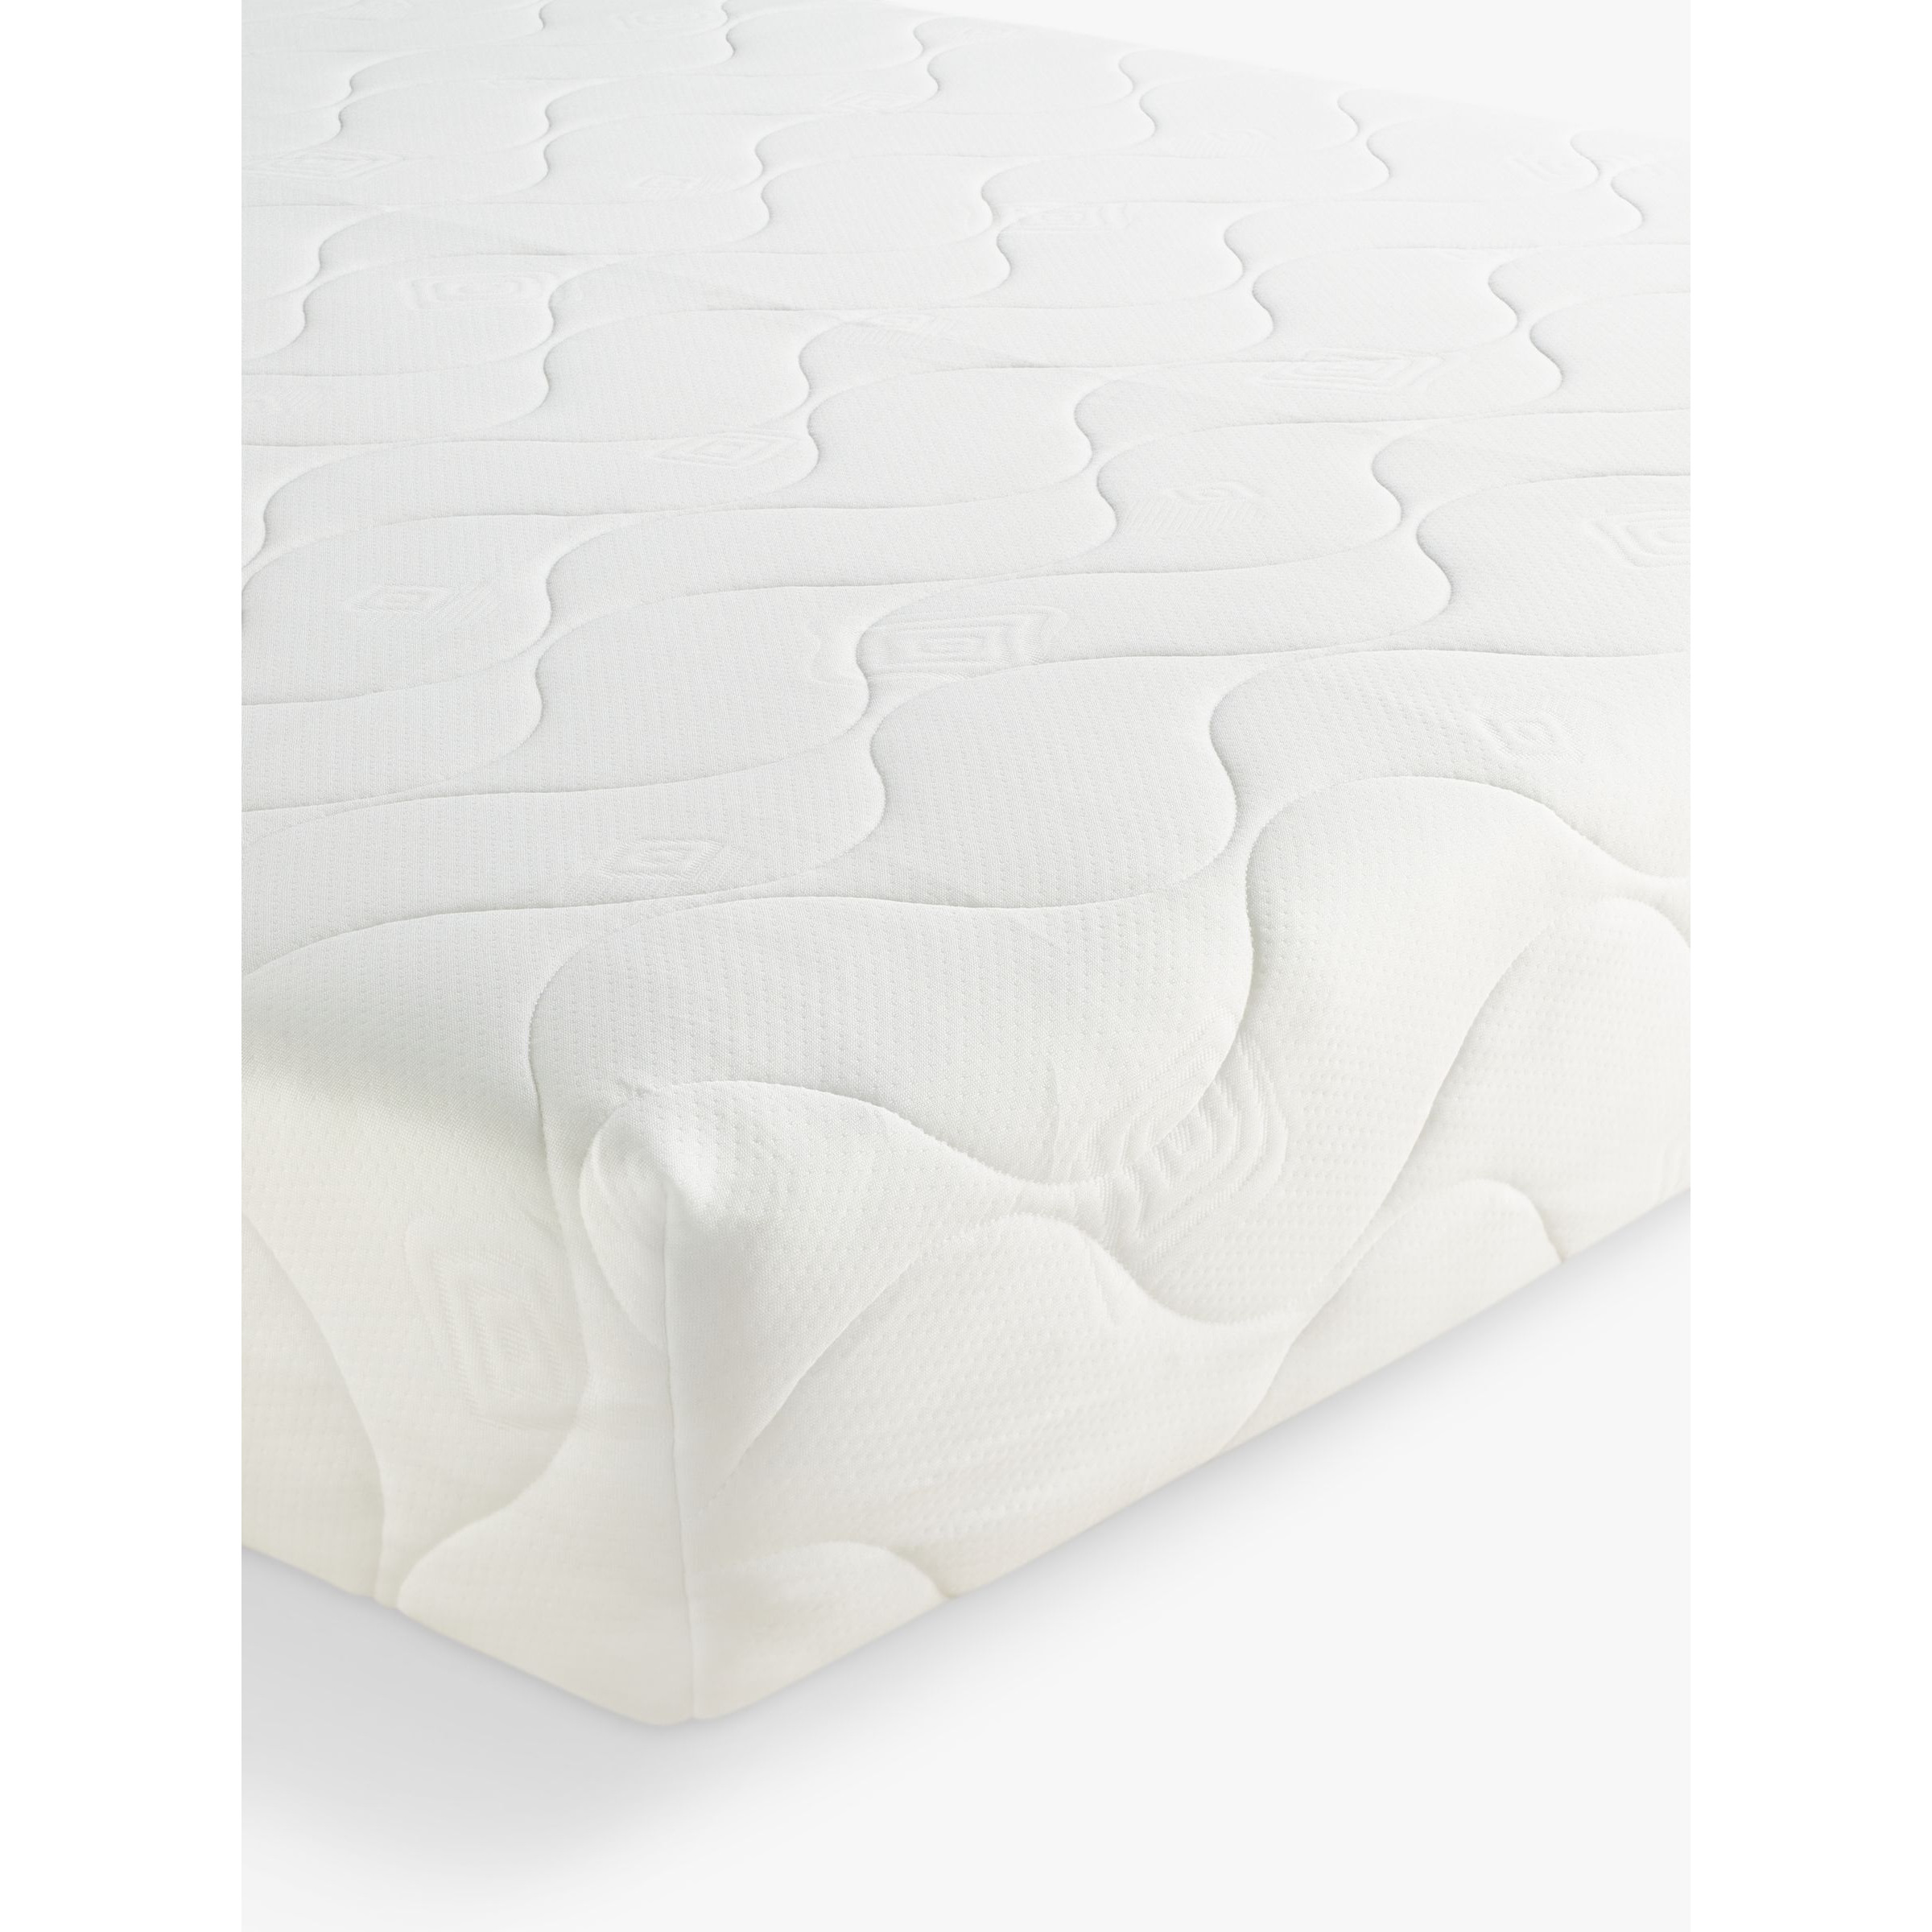 John Lewis ANYDAY Rolled Deep Memory Foam Mattress, Medium/Firm Tension, Small Double - image 1